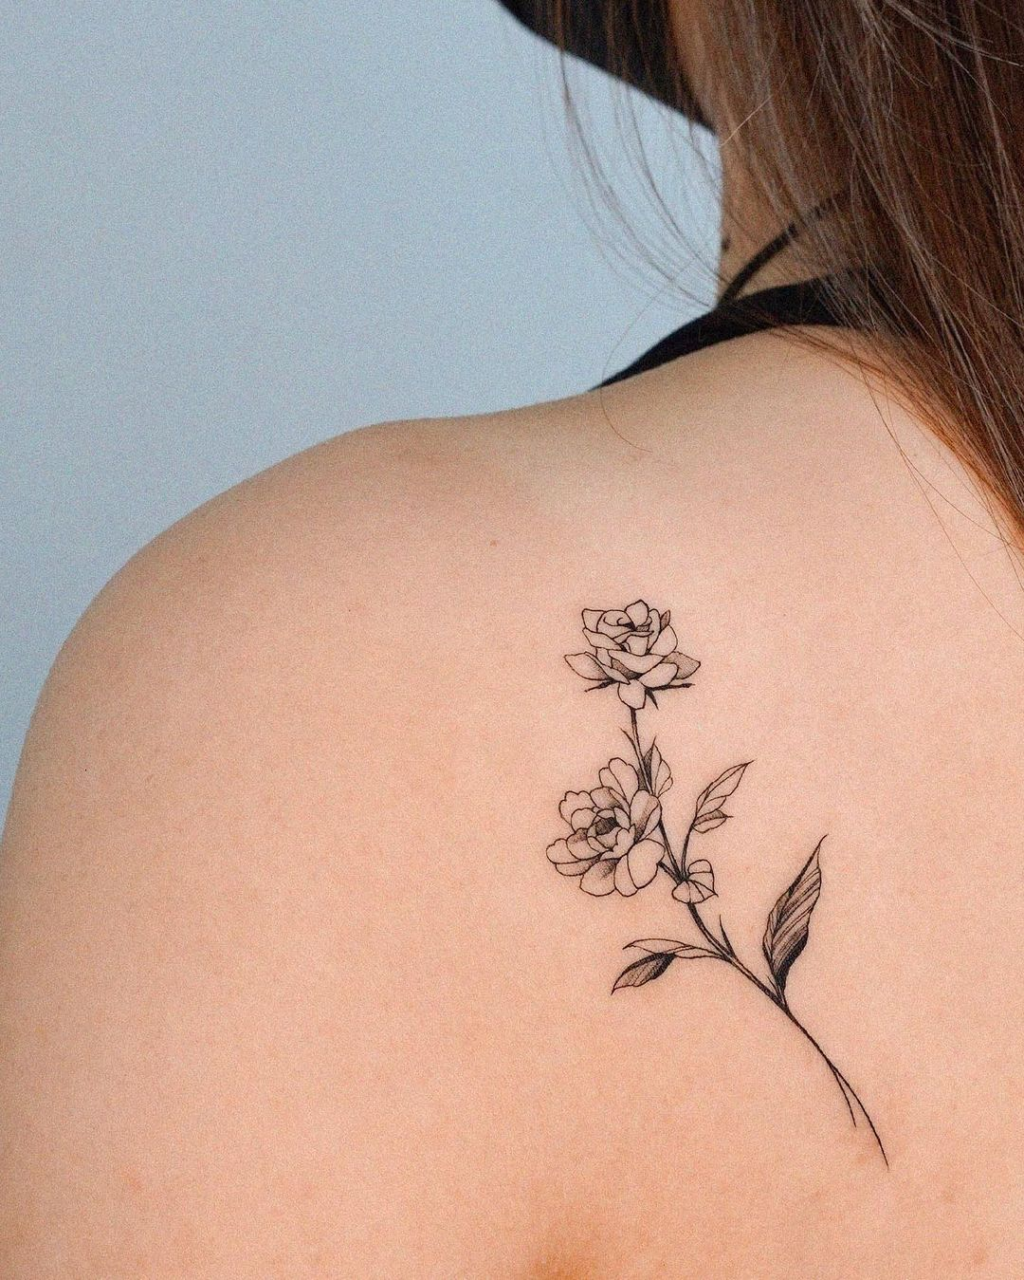 Gentle & Meaningful: 60+ Rose Tattoo Designs Just for You - InkMatch